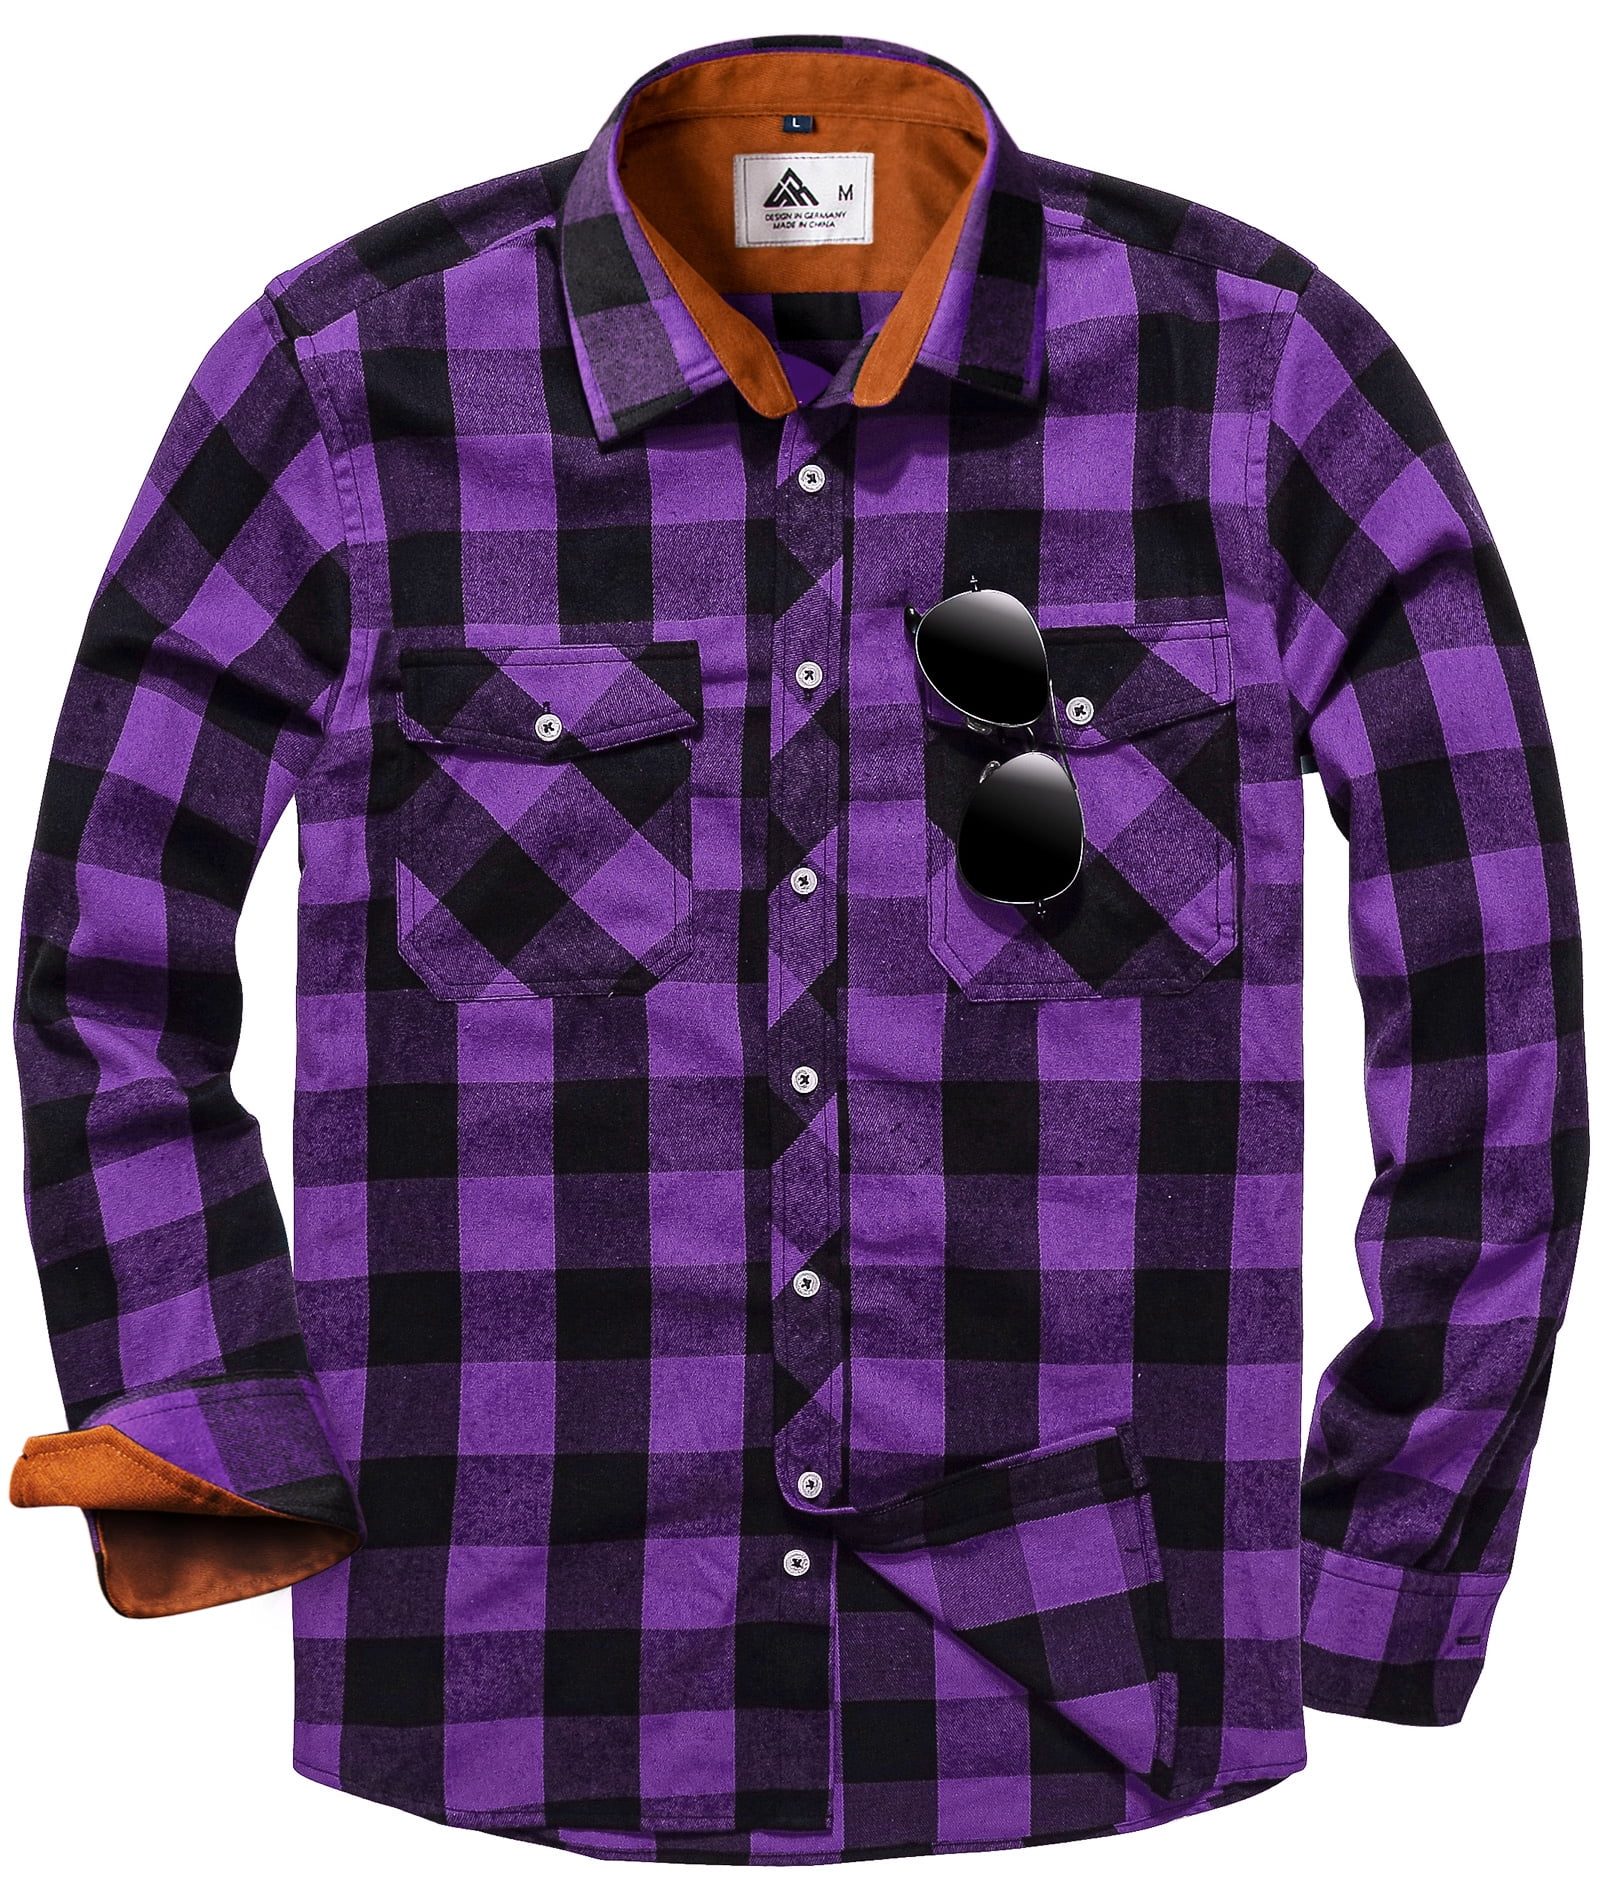 SWISSWELL Men's Plaid Flannel Shirts Cotton Long Sleeve Shirt Casual ...